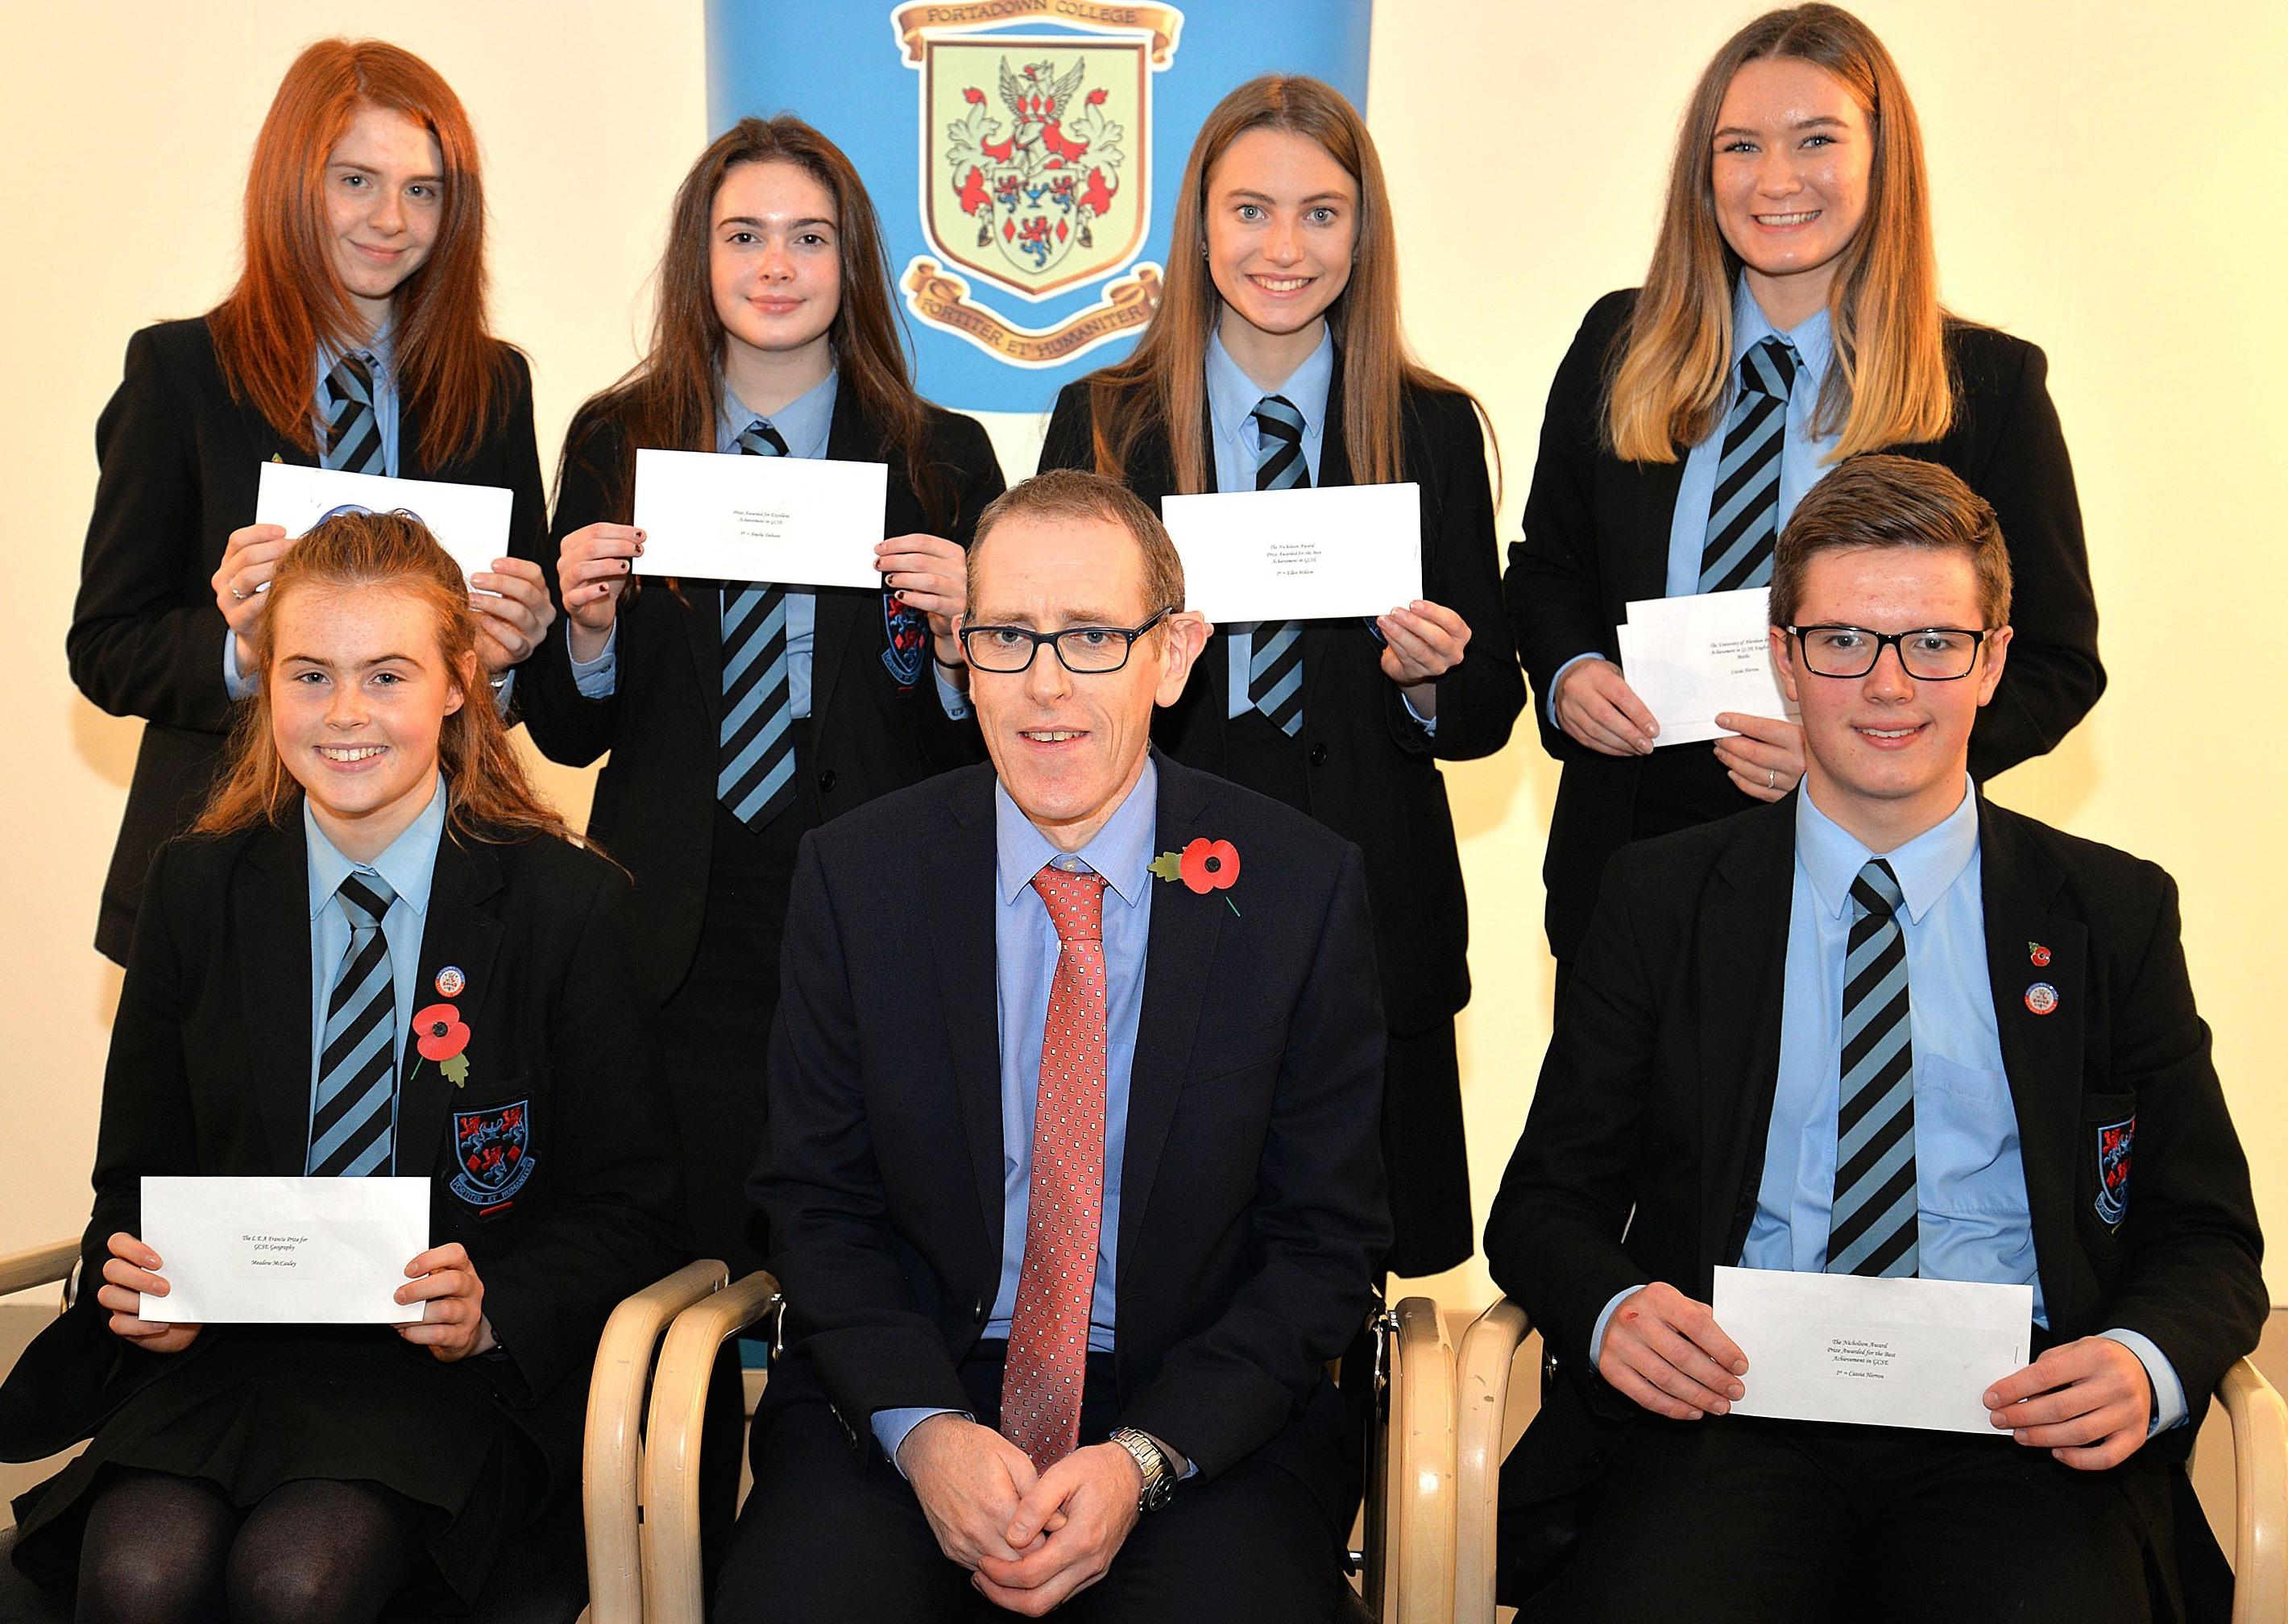 Vice principal, Mr Peter Richardson pictured with some of the 'A' level subject prizewinners at the school Speech Day. Included are back row from left, Suzanne Webb, Spanish, Amelie Dobson, English, Ellen Wilson, Religious Studies,  and Cassia Herron, Chemistry. Front from left, Meadow McCauley, Geography and Andrew Martin, Agriculture and Land Use. INPT44-219.